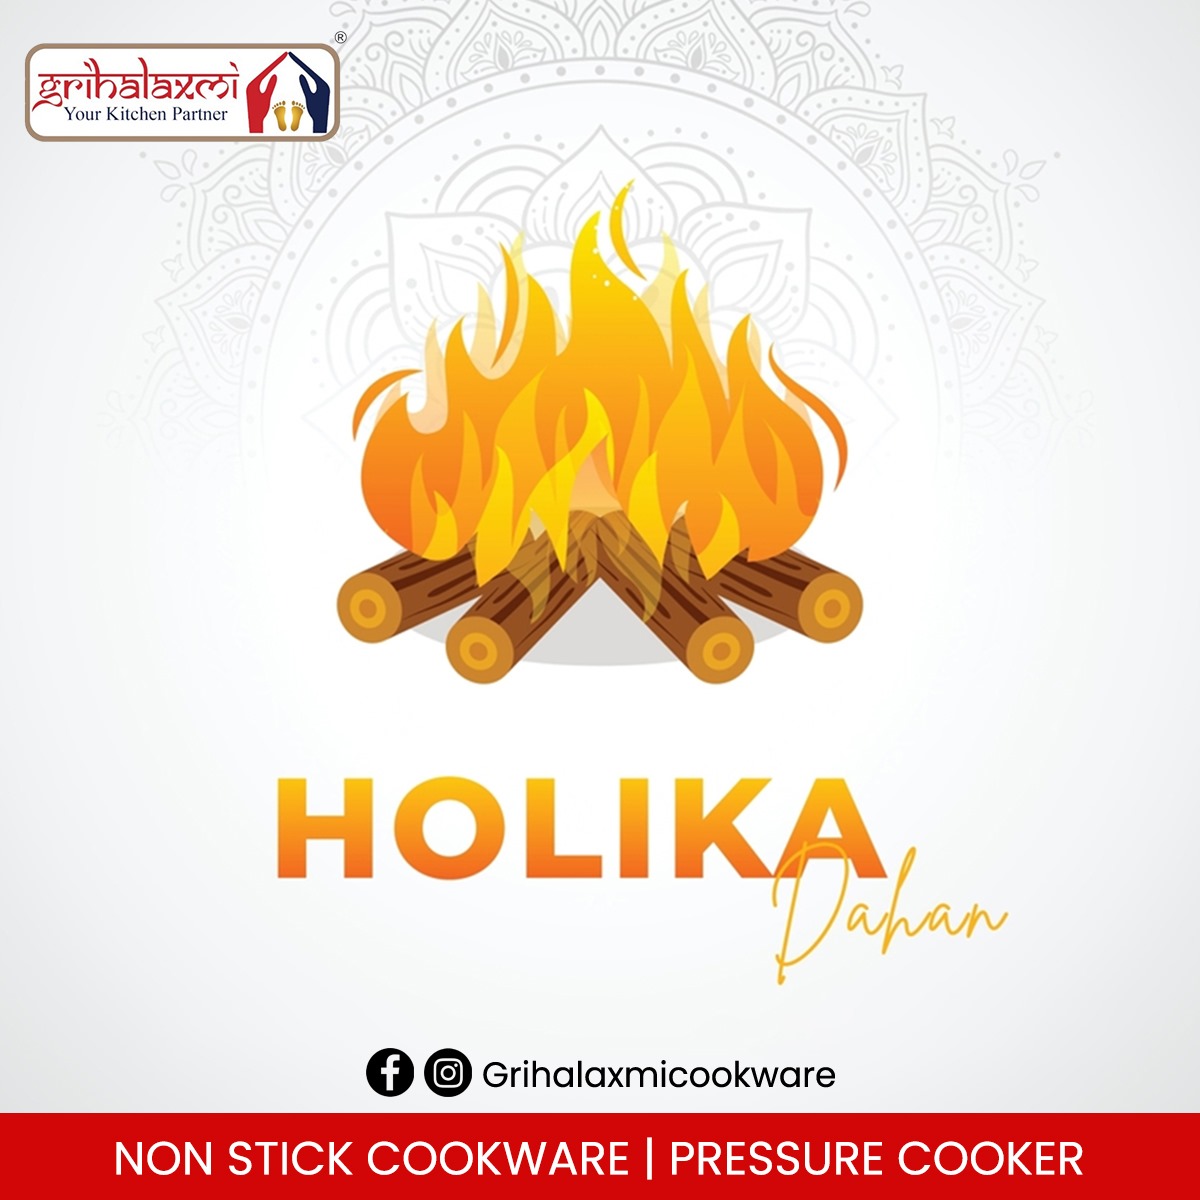 🔥 As the sacred flames of Holika Dahan illuminate the night sky, may they bring warmth, light, and blessings into your life. May this auspicious occasion of Holika fill your home with joy, prosperity, and happiness. Wishing you and your loved ones a very Happy Holika Dahan!